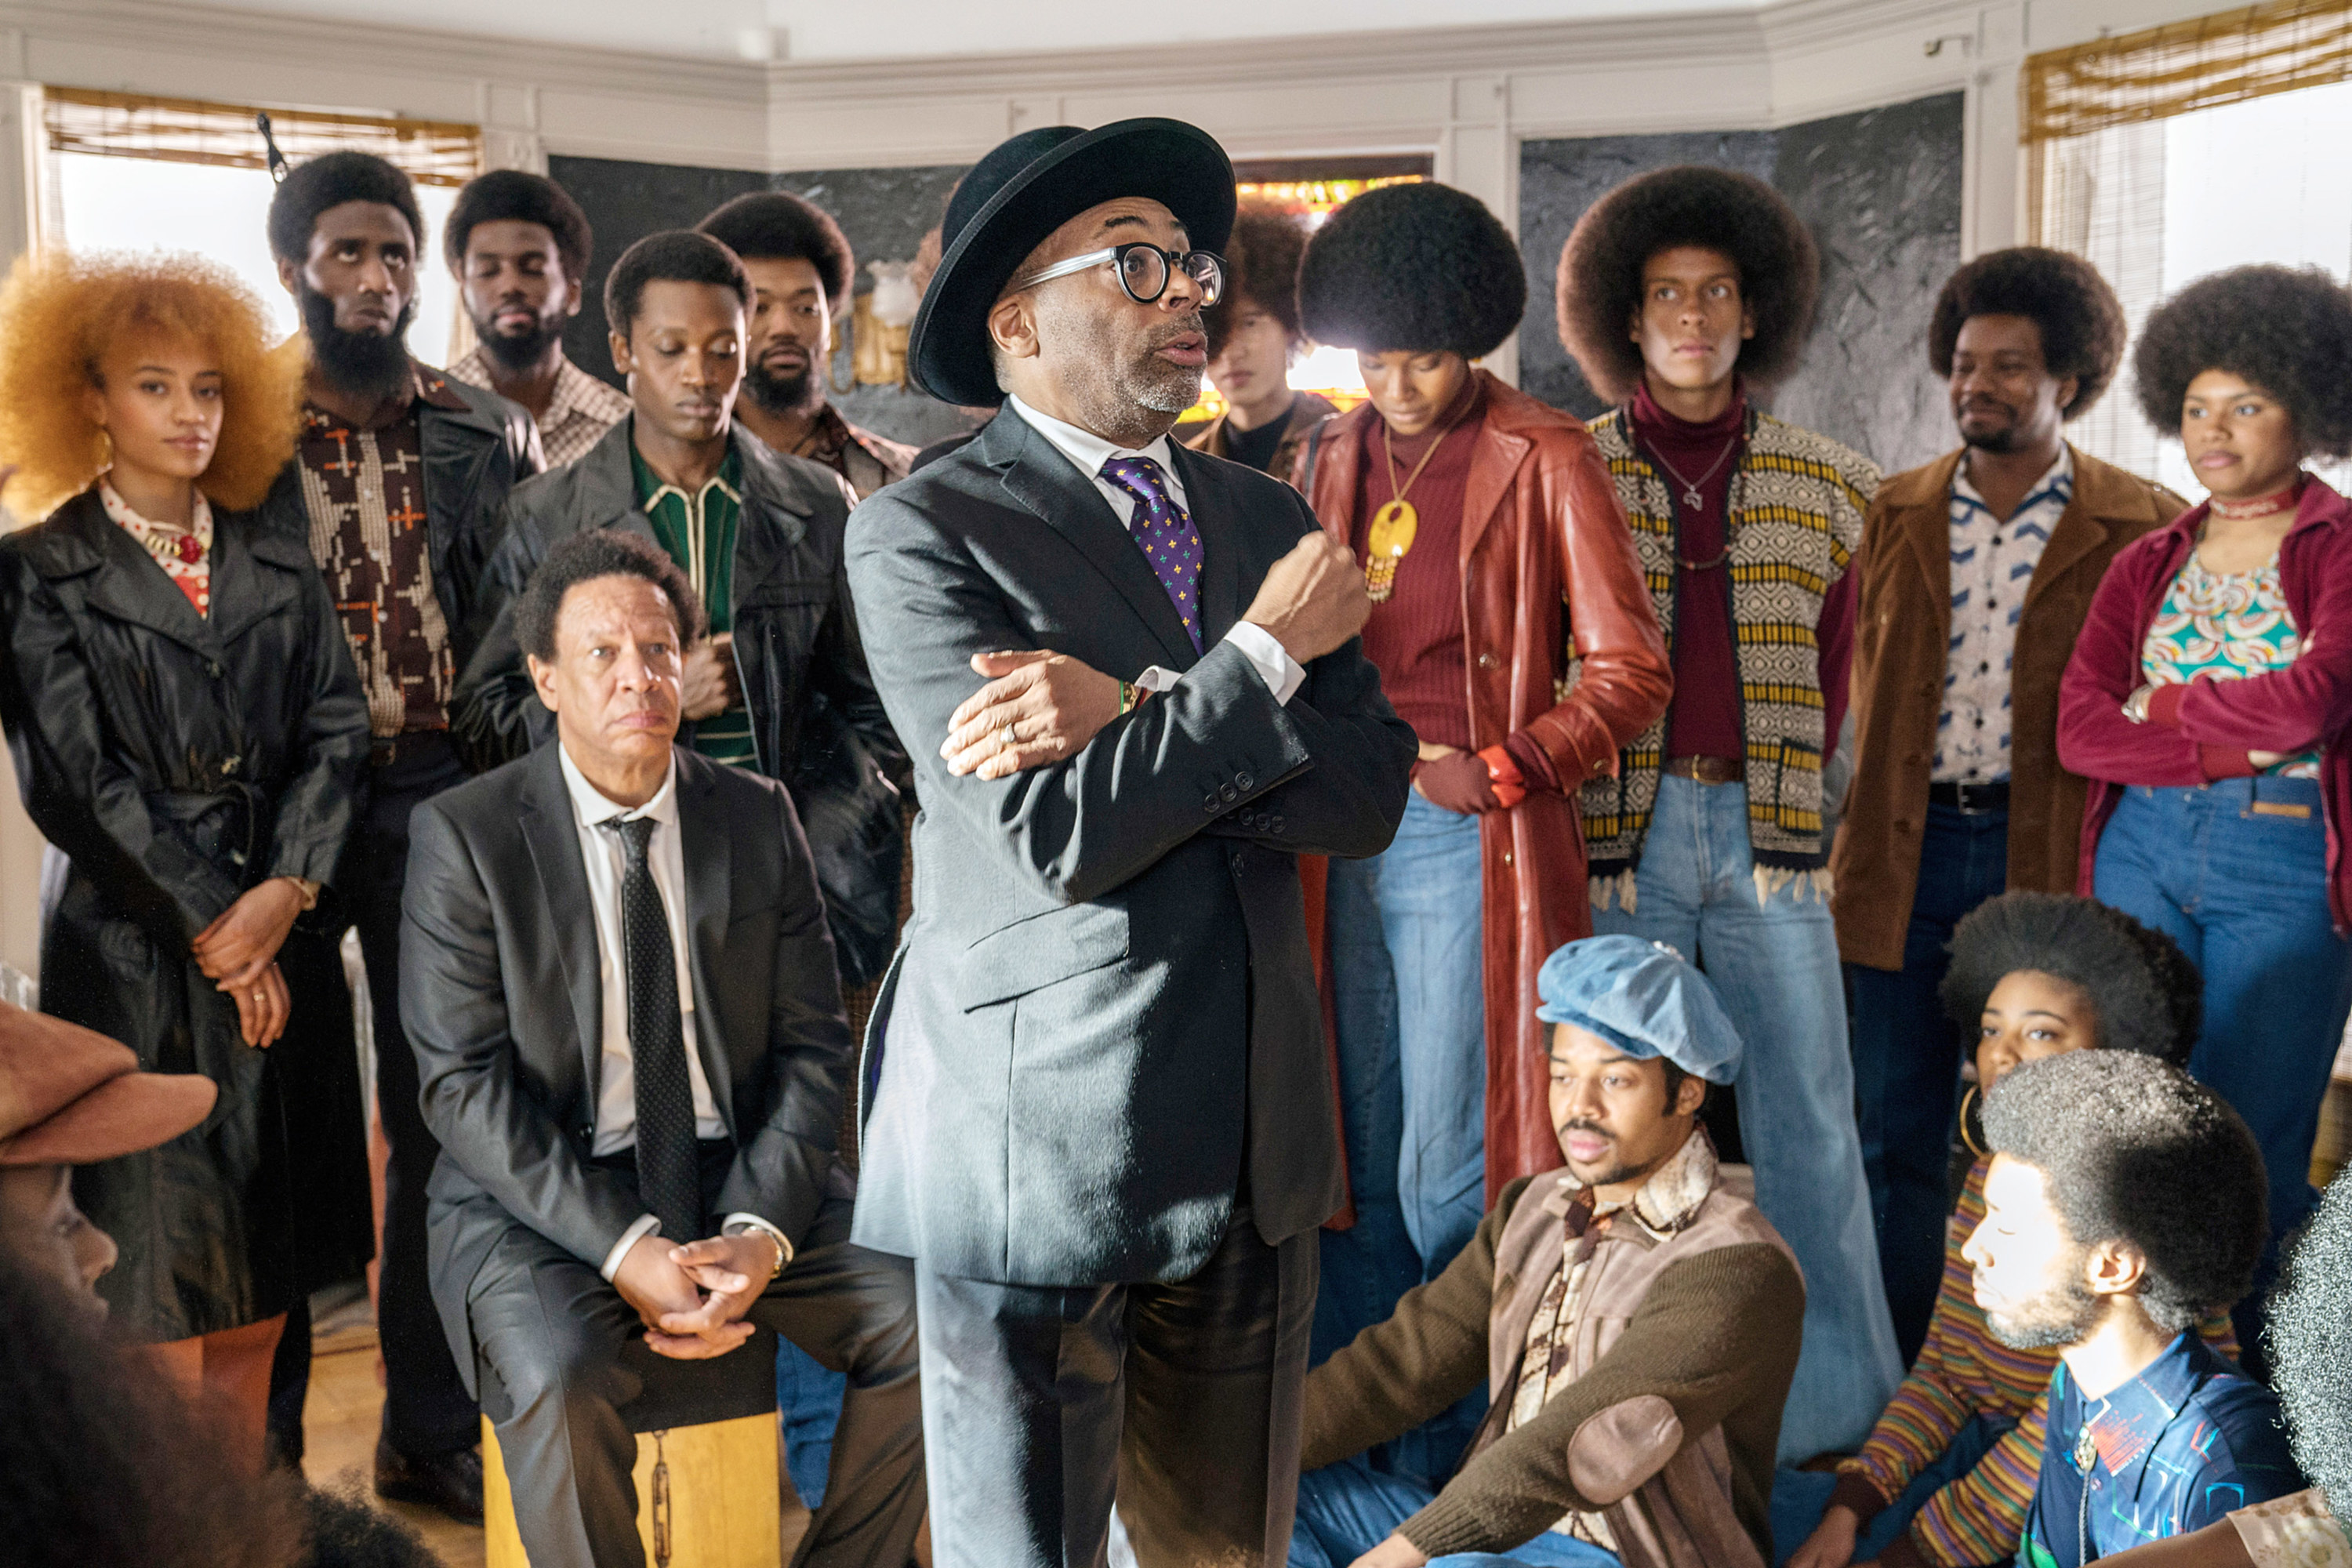 Spike Lee surrounded by members of the cast